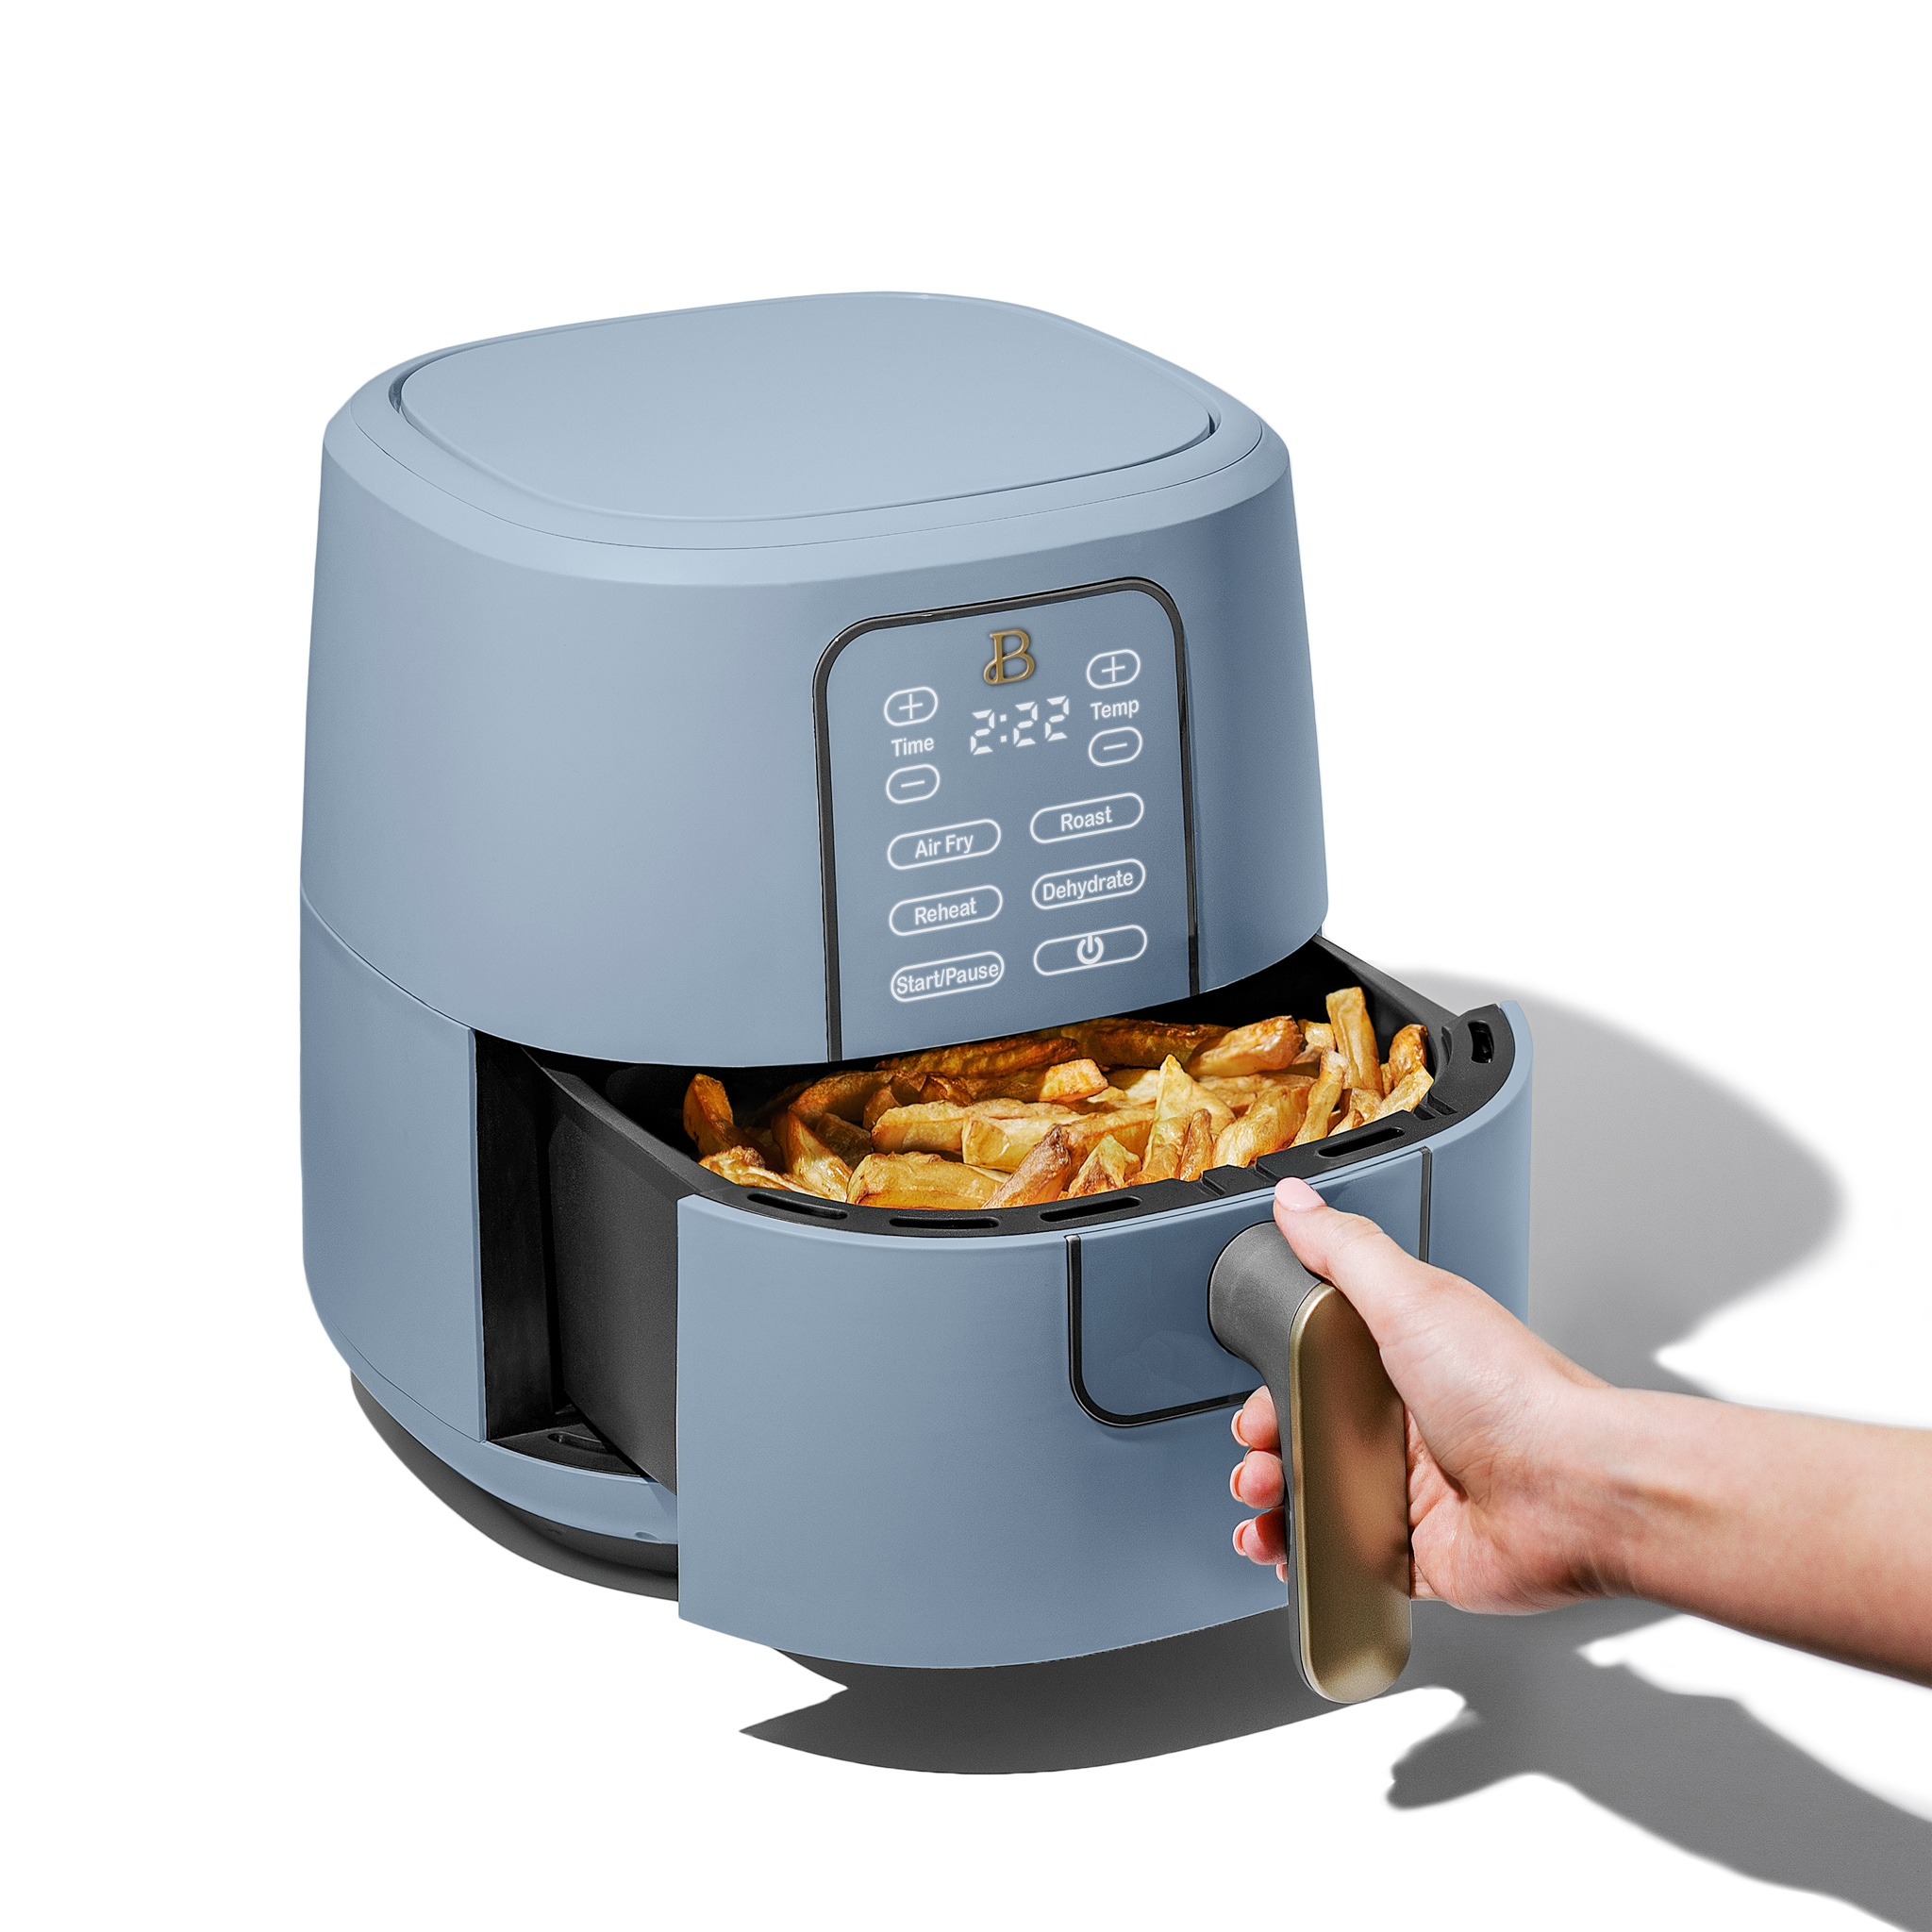 Beautiful 6 Qt Air Fryer with TurboCrisp Technology and Touch-Activated Display, Cornflower Blue by Drew Barrymore - image 6 of 8